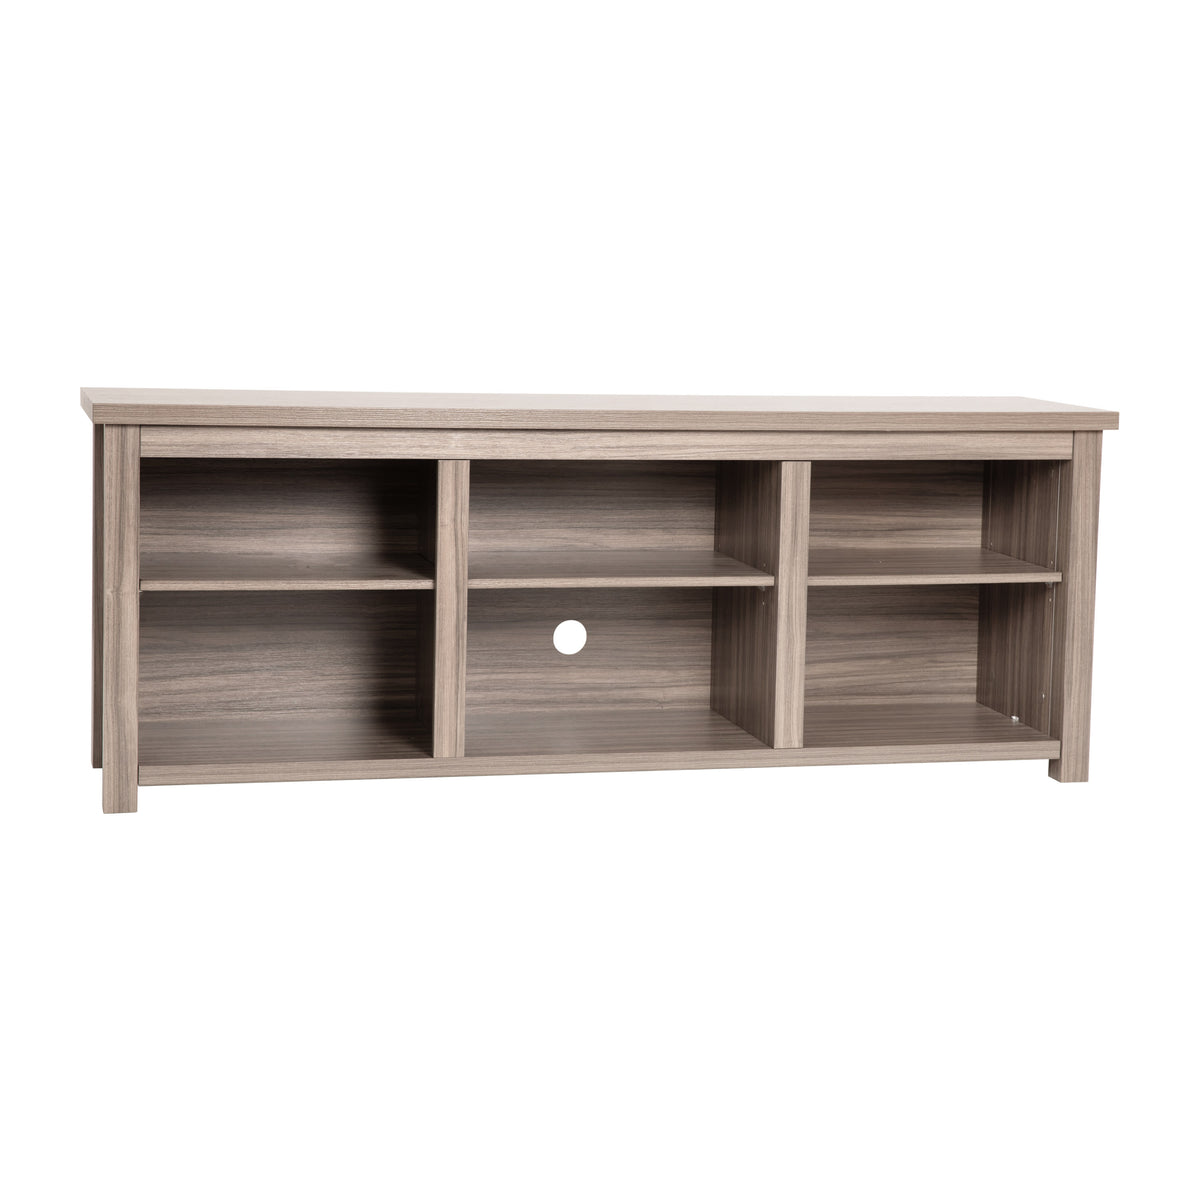 Gray Wash Oak |#| TV Stand up to 80inch TVs with 6 Open Storage Compartments in Gray Wash Oak Finish